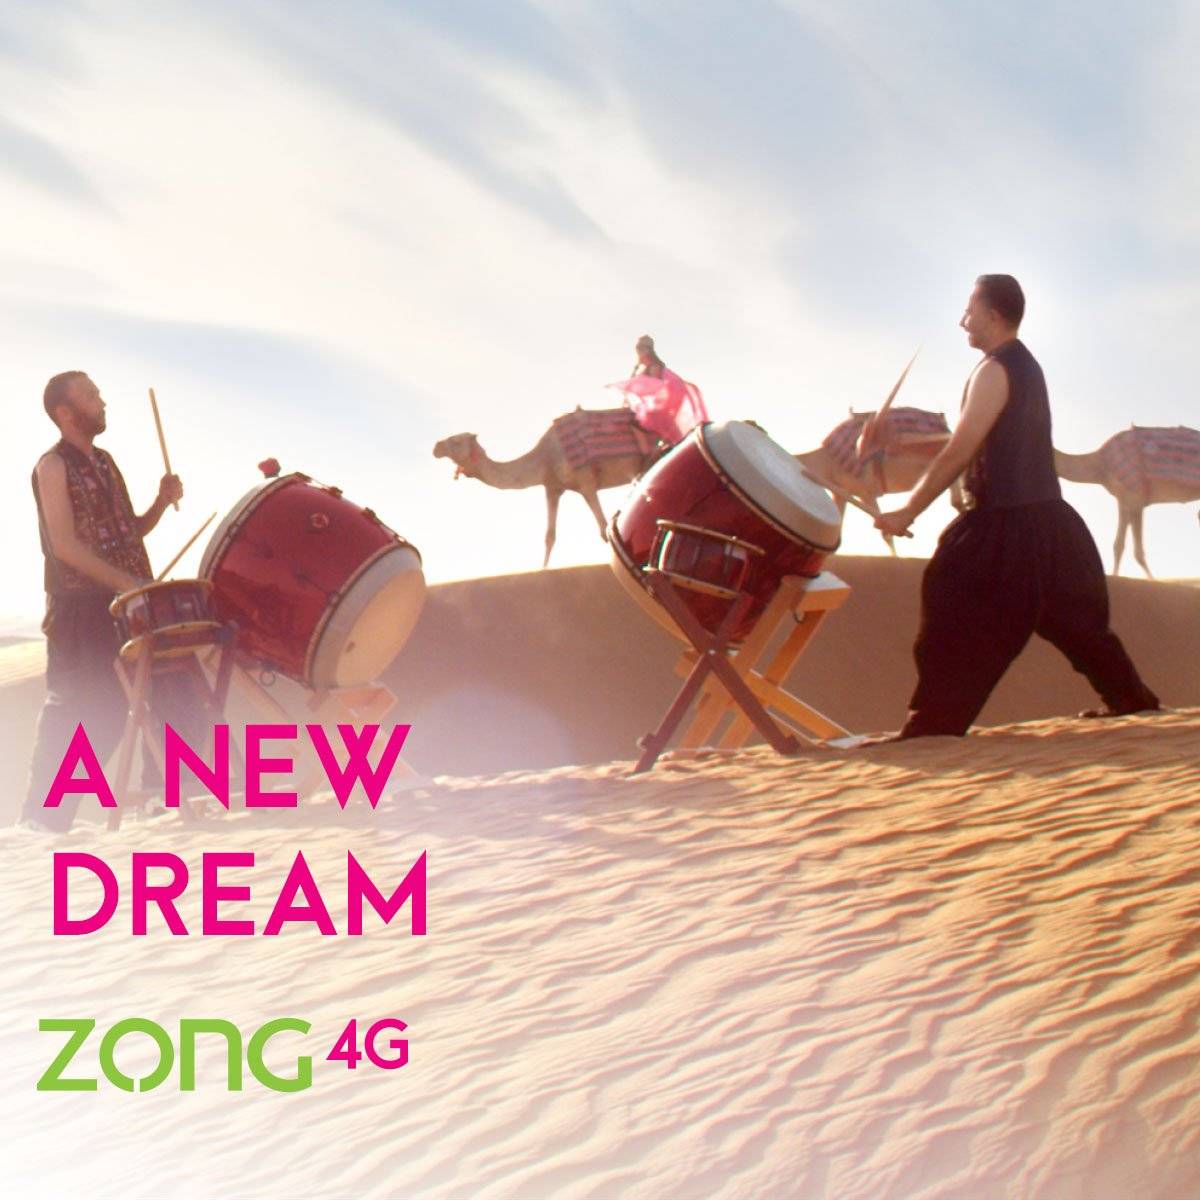 Digital lifestyle in Pakistan is only possible with Zong 4G